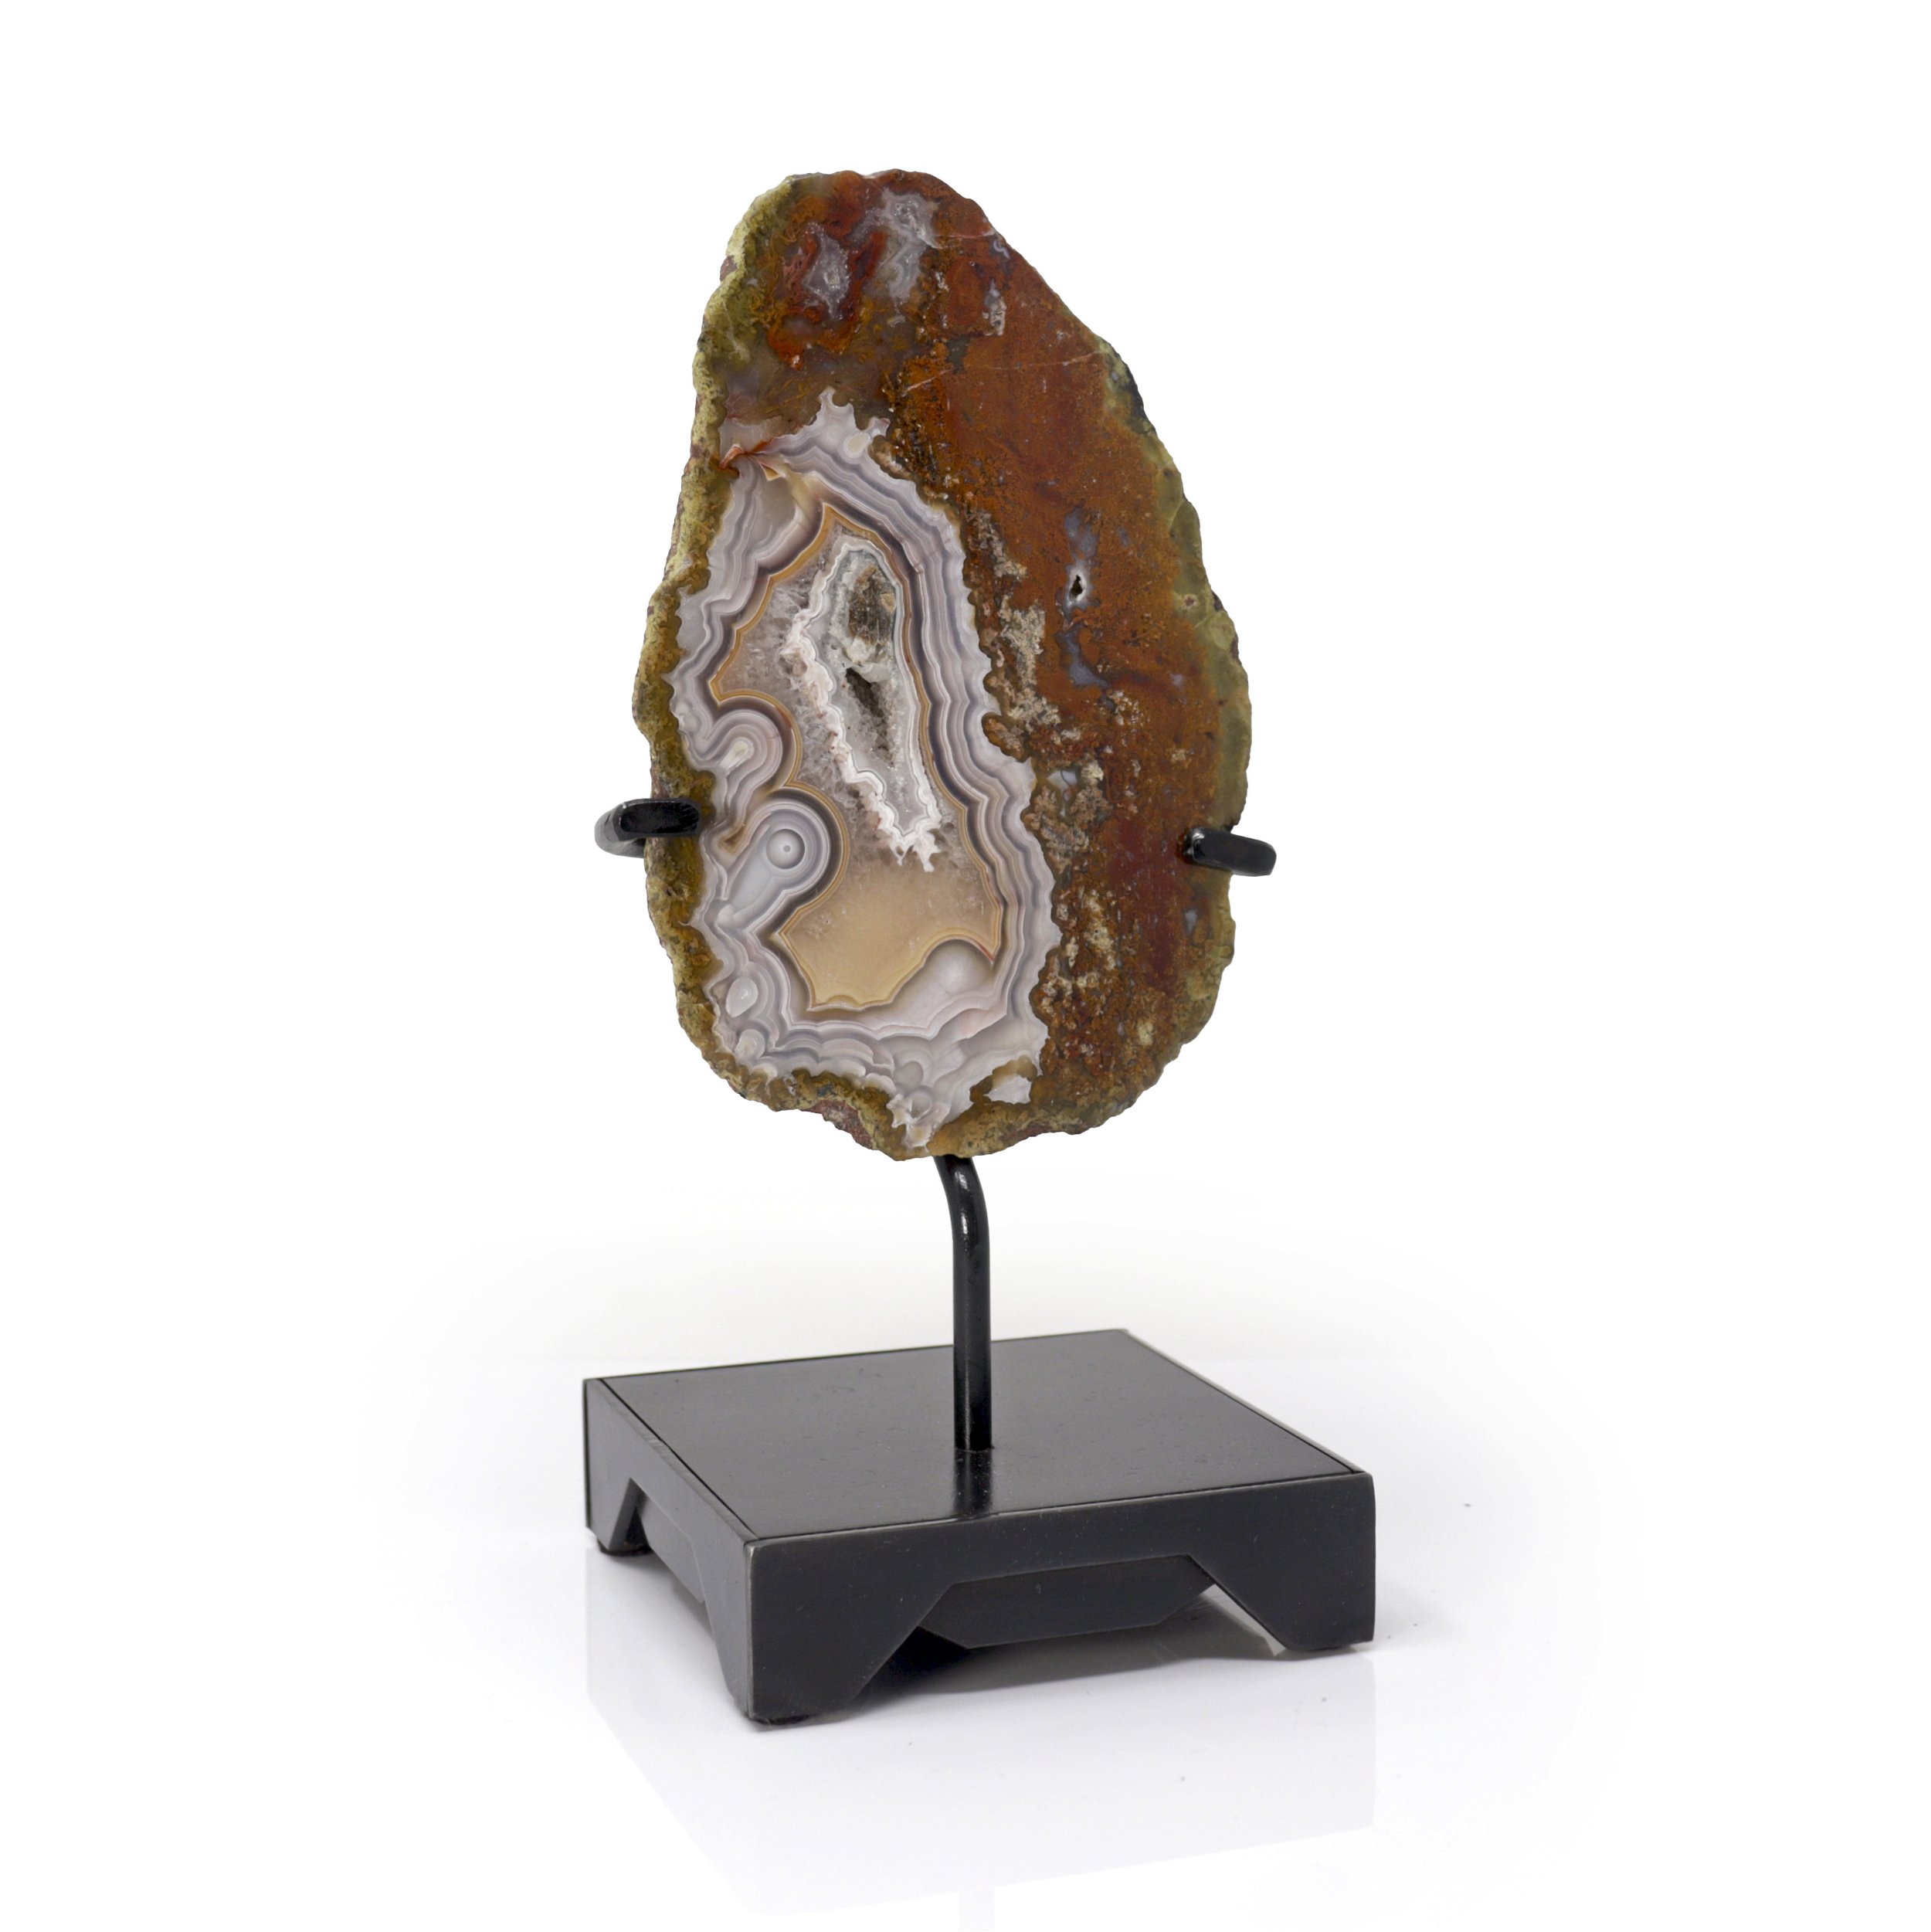 Agua Nueva Agate Geode On A Custom Black Square Stand With Trapezoidal Designs - Gray And Beige With A Small Druze Pocket